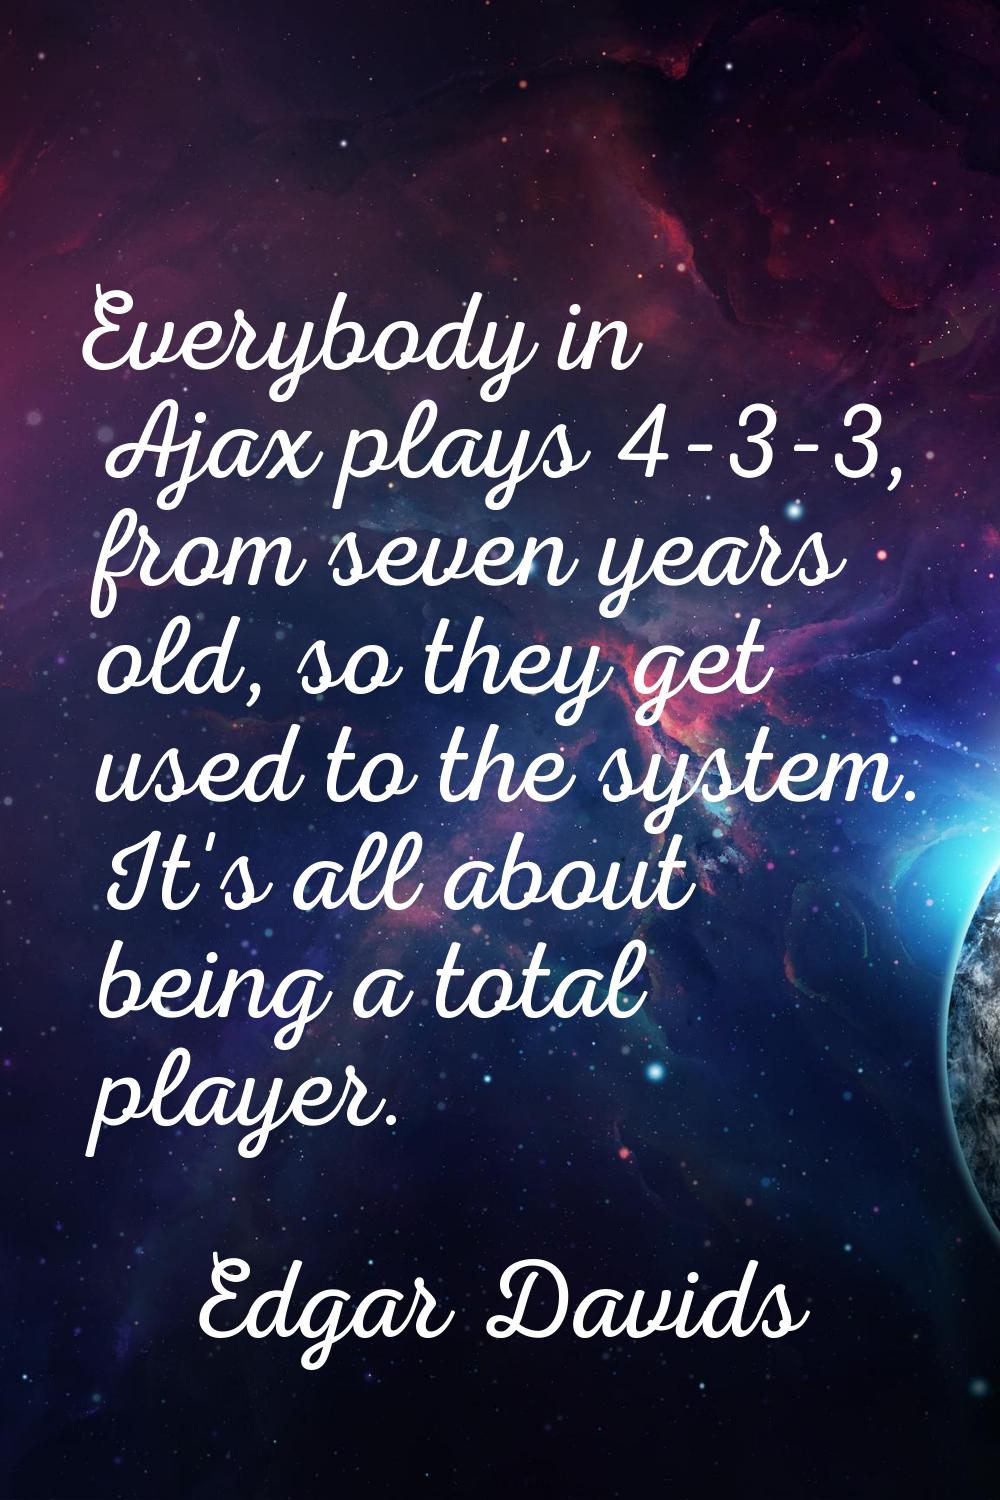 Everybody in Ajax plays 4-3-3, from seven years old, so they get used to the system. It's all about